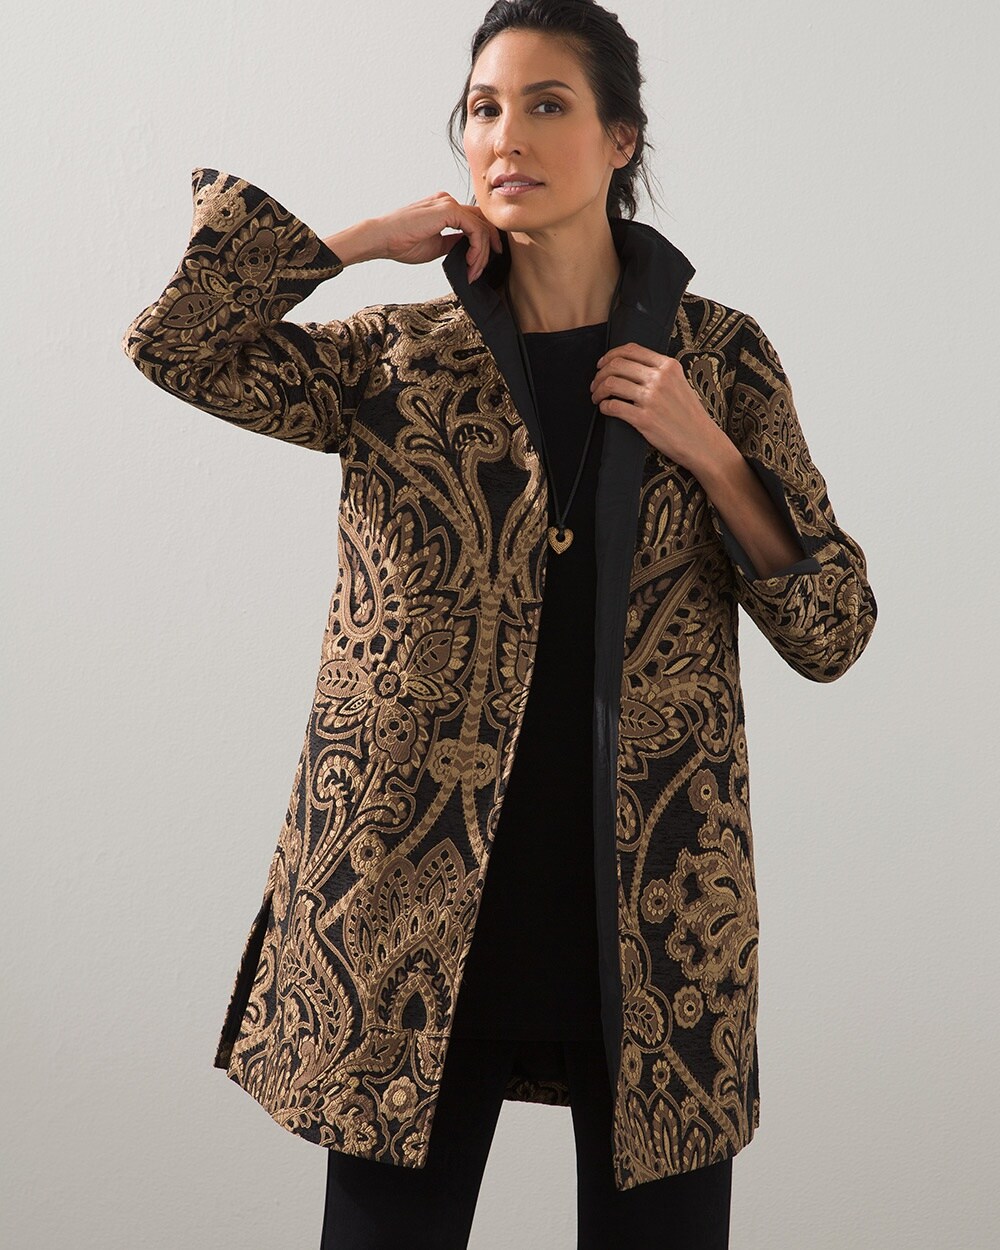 Travelers Collection Jacquard Jacket